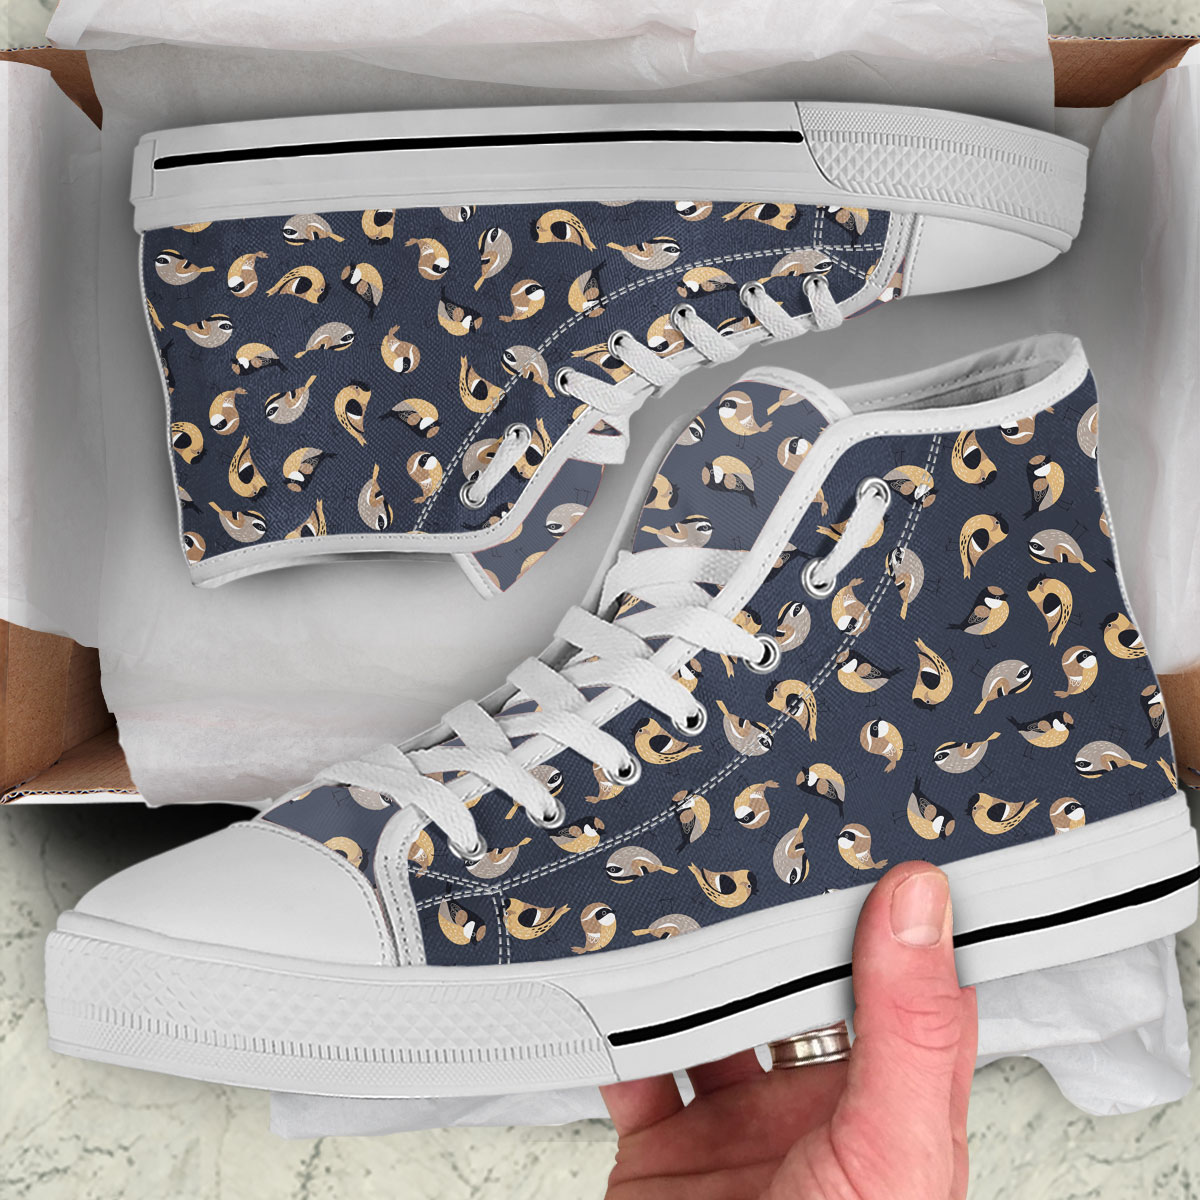 Coon Illustration Finch High Top Shoes